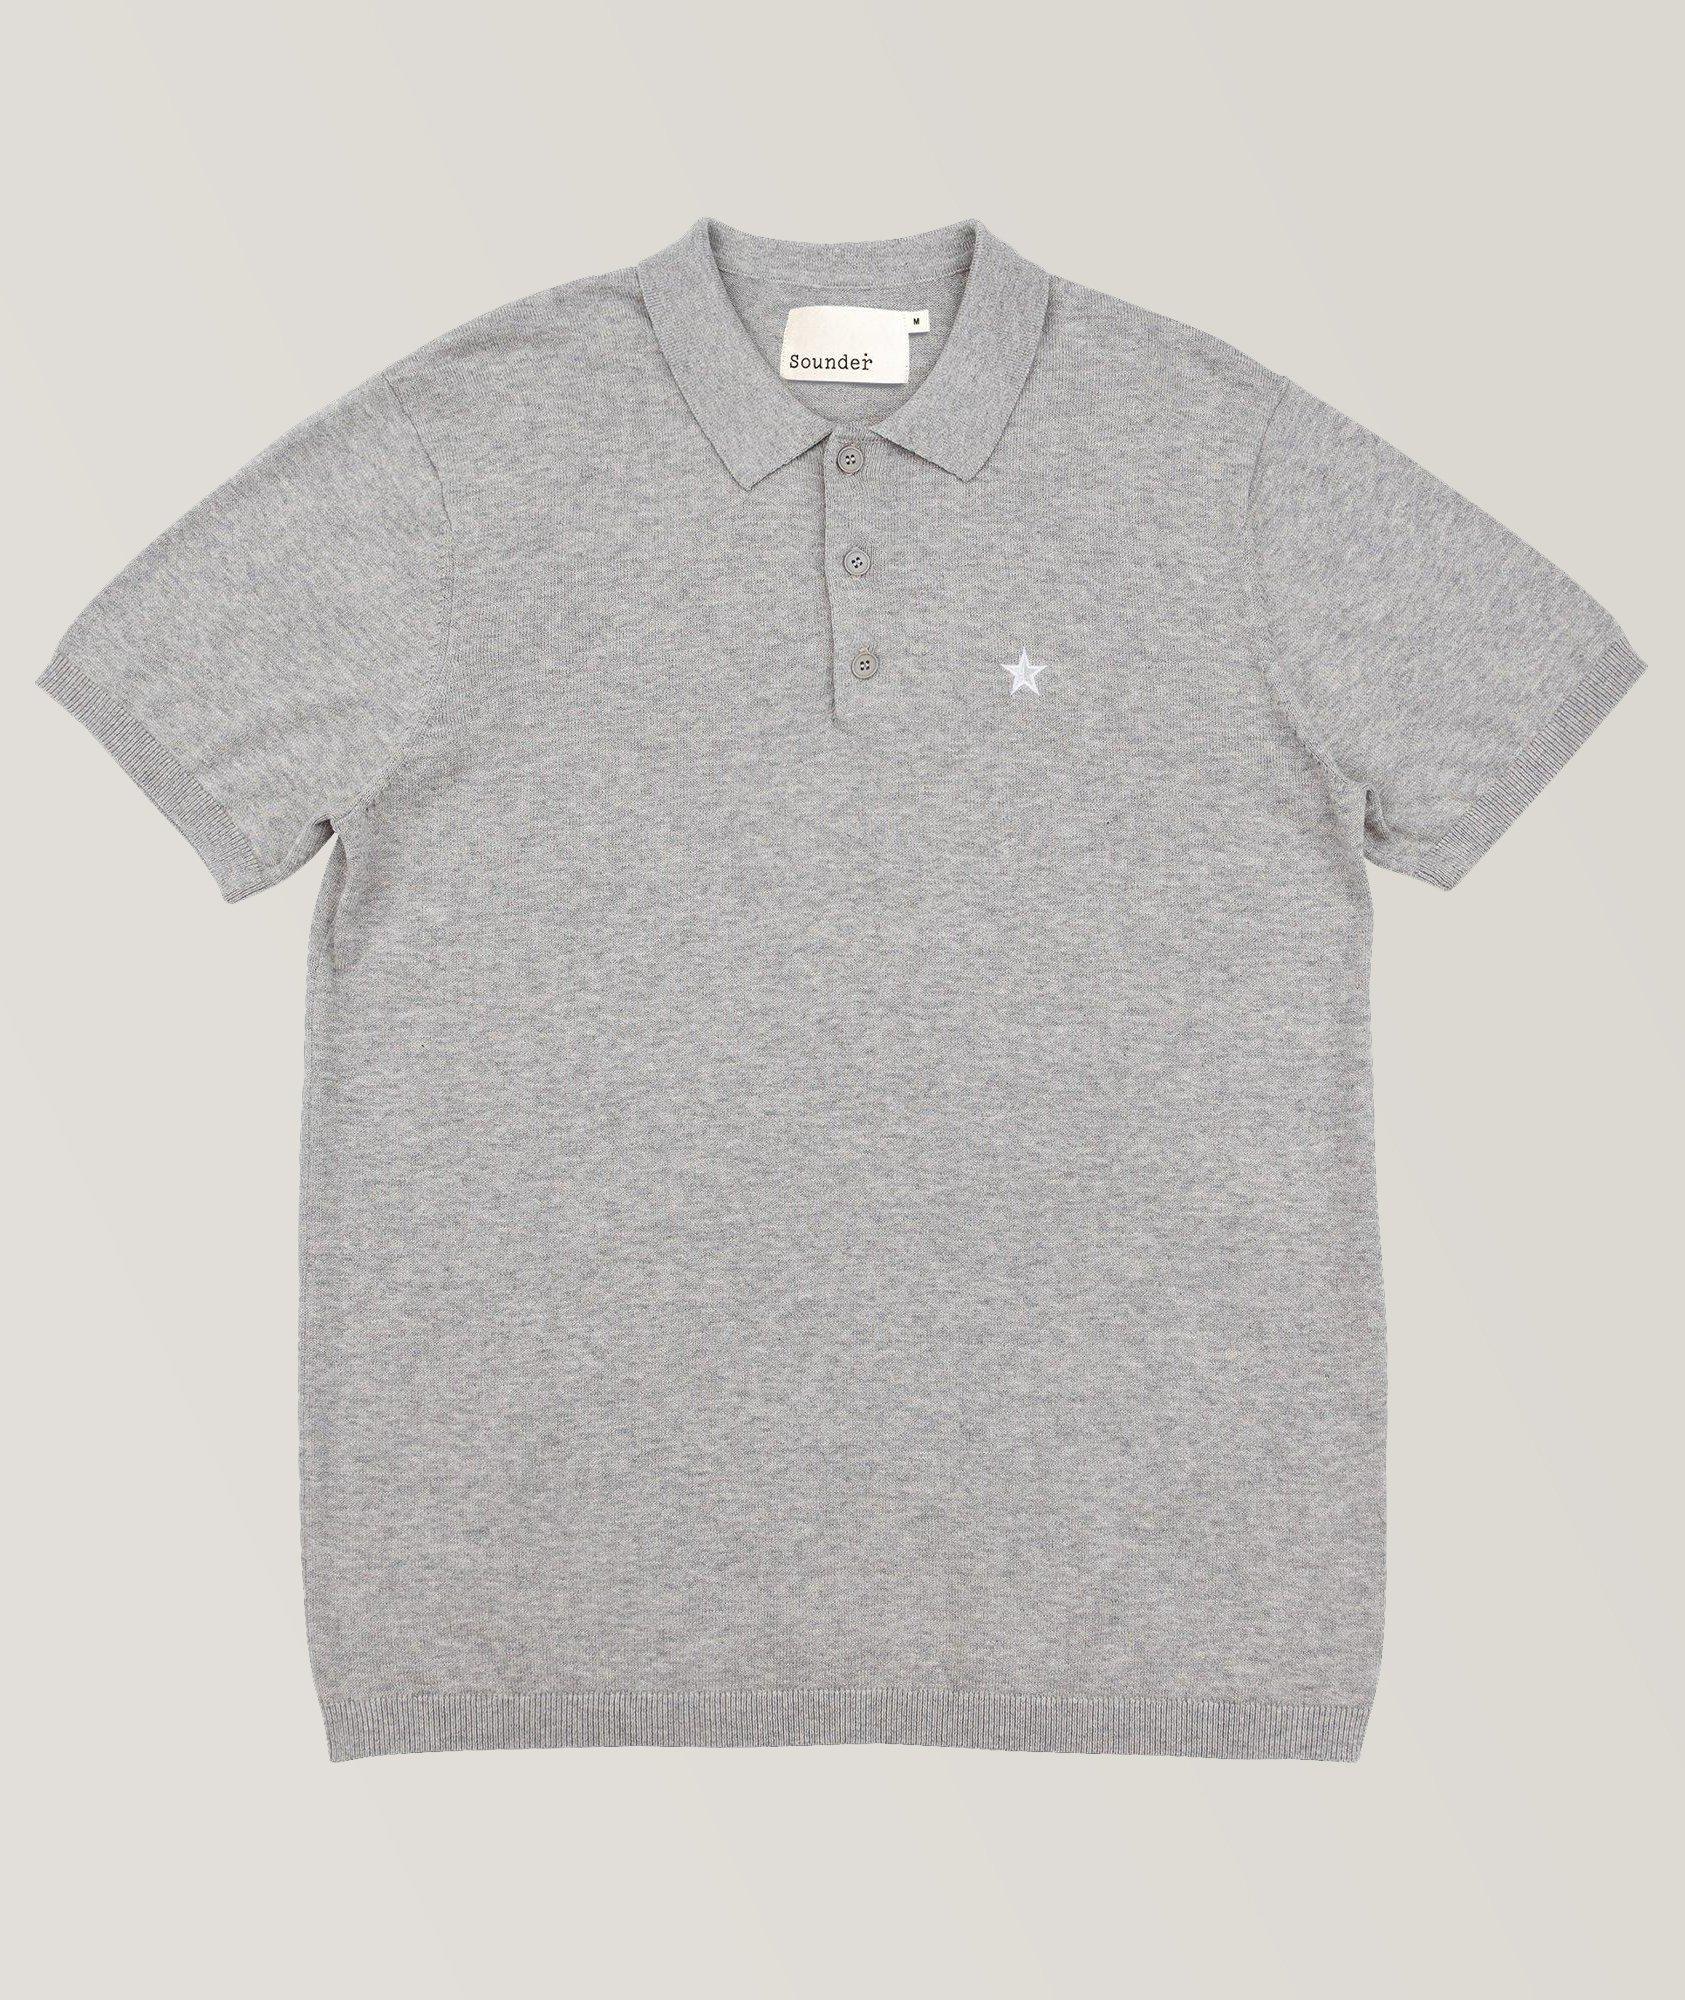 Play Well Cotton Knit Polo image 0